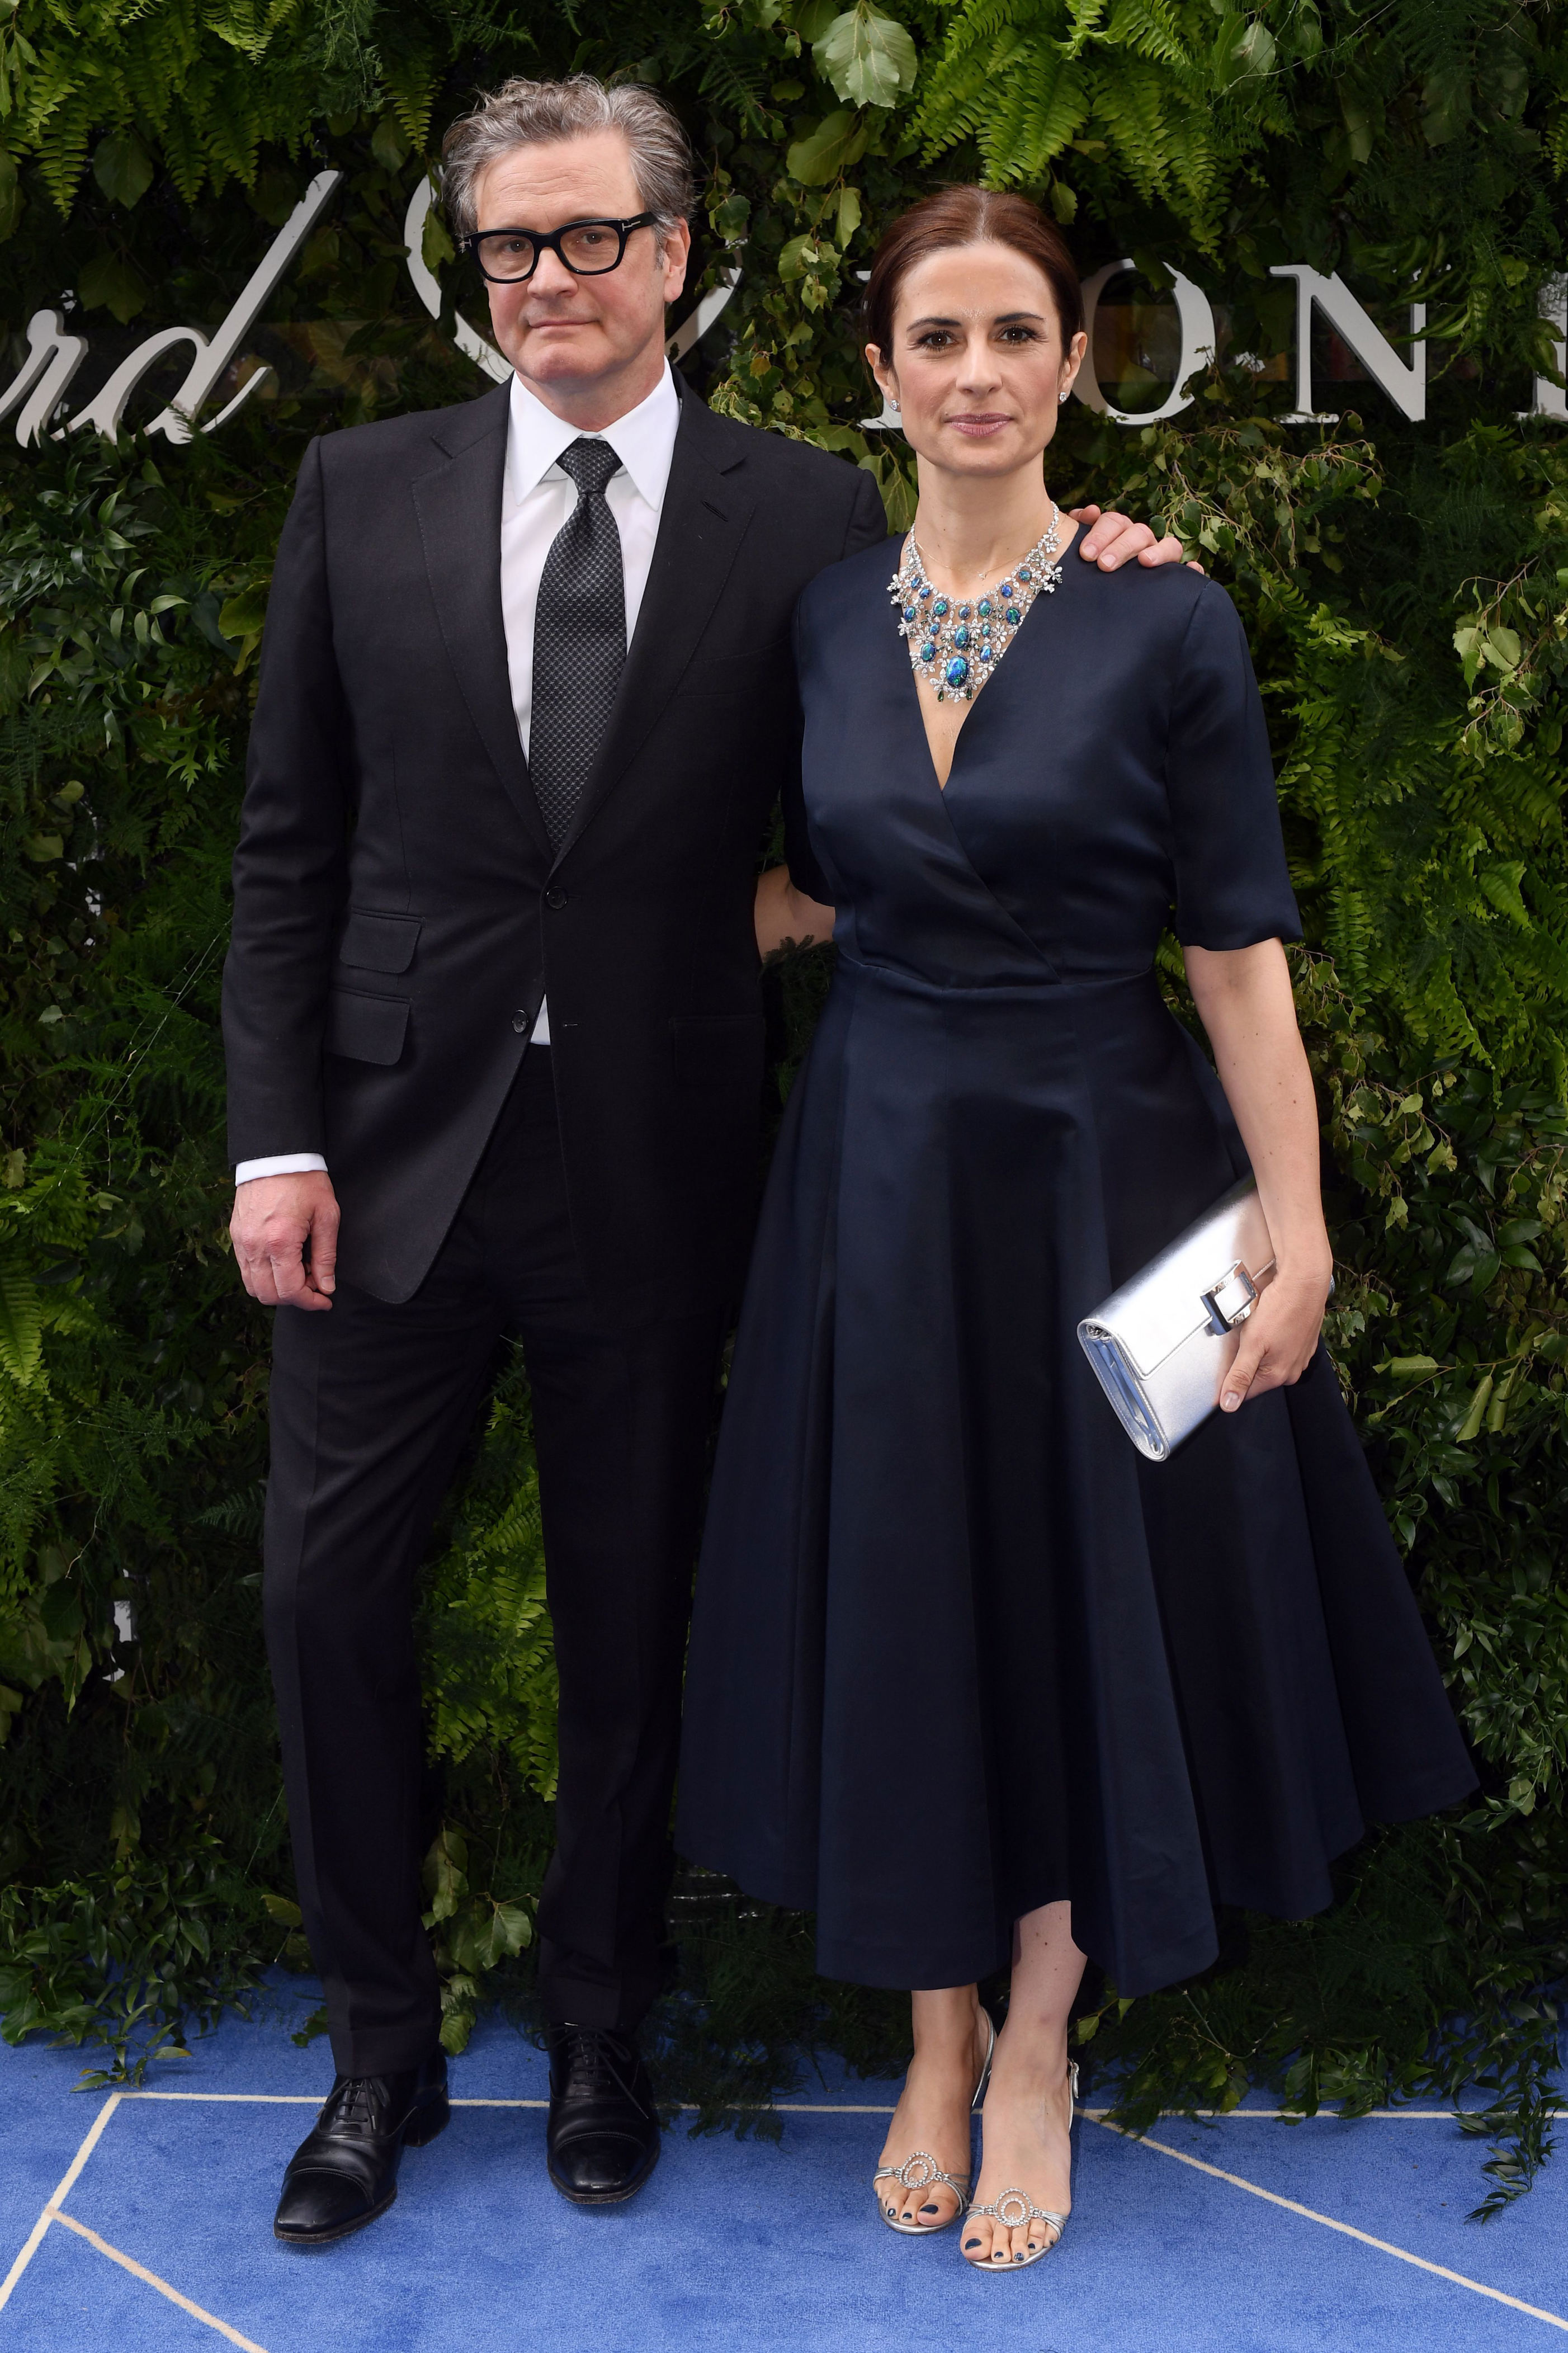 <p>In early 2018, an Italian newspaper revealed that during a 2015 break from their marriage, <a href="https://www.wonderwall.com/celebrity/profiles/overview/colin-firth-1233.article">Colin Firth</a>'s then-wife of more than two decades, Livia Giuggioli, had a yearlong relationship with Italian journalist Marco Brancaccia, whom she accused of stalking her after she called off the romance to reunite with her husband. Marco then sued Livia for falsely accusing him of a crime, insisting that she made up the stalking claims as a cover for their affair. Ultimately, Colin and Livia's reconciliation proved to be short-lived: They <a href="https://www.wonderwall.com/news/colin-firth-and-wife-split-after-22-years-marriage-3021817.article">called it quits</a> in late 2019.</p>